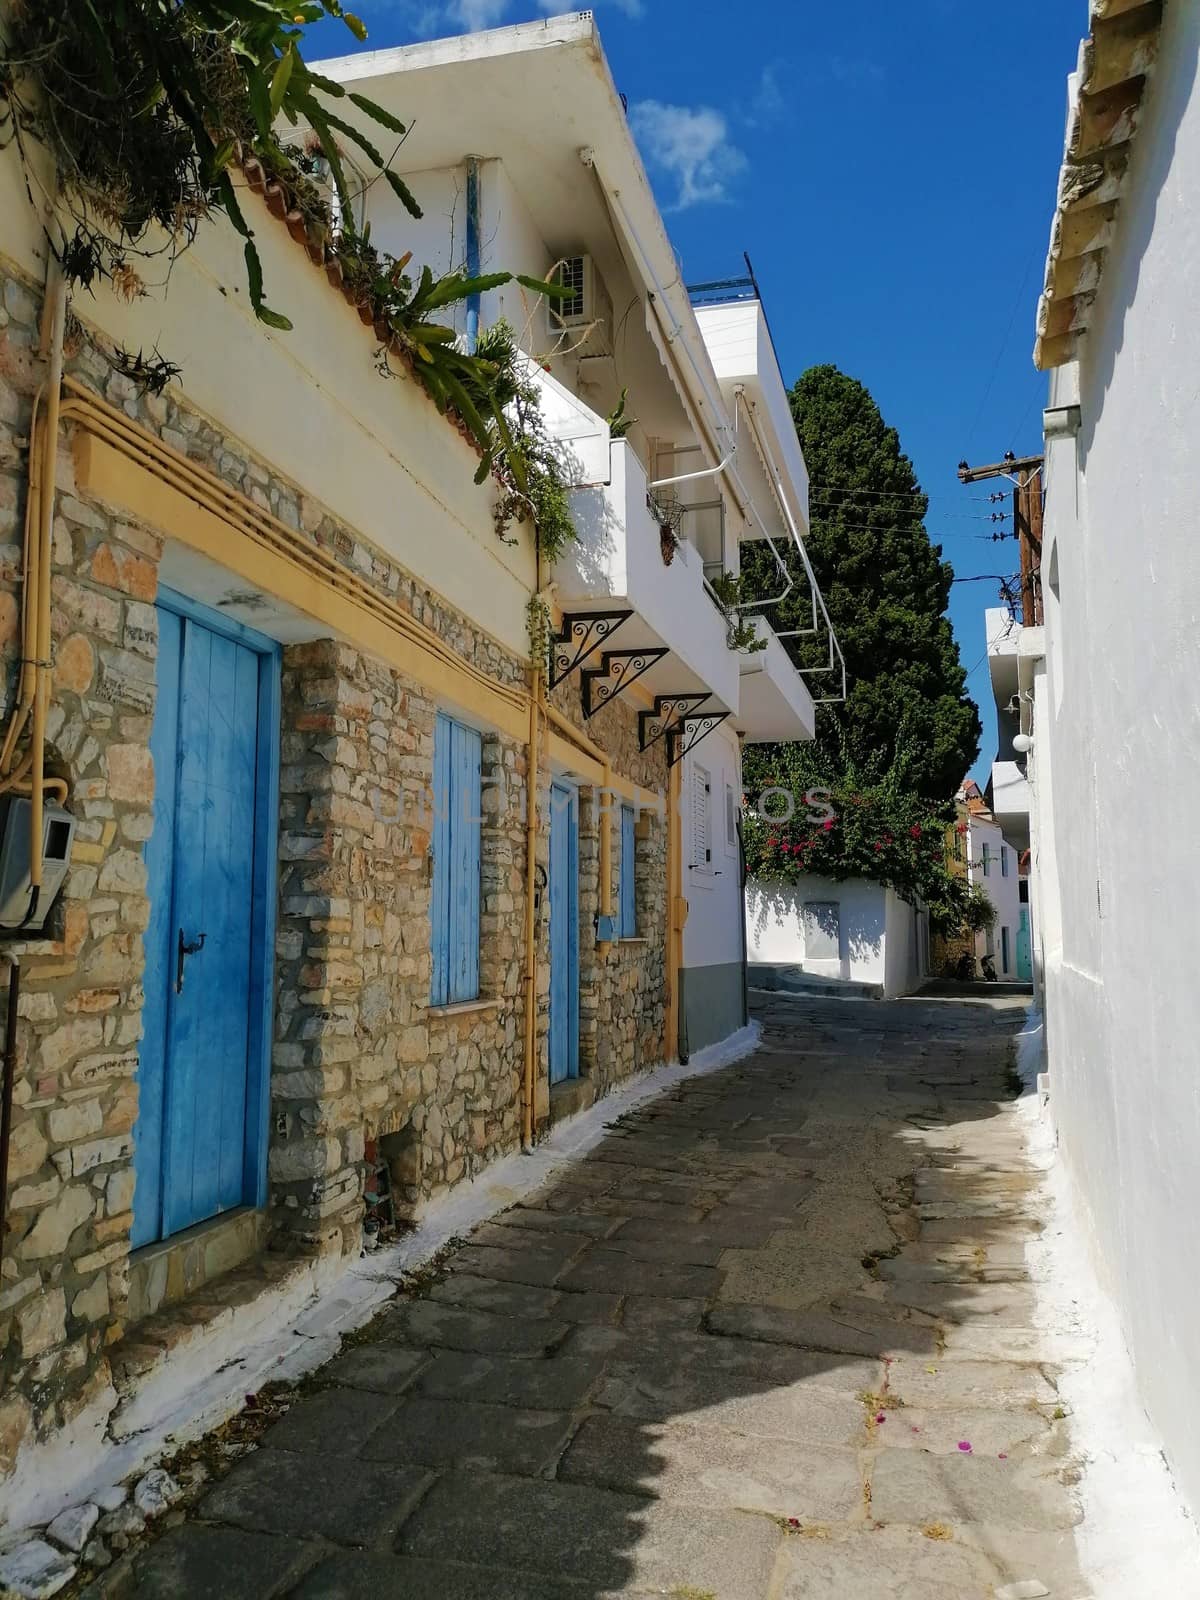 blue and white houses and doors in greece. Greek Ermioni road or street. by AndrewUK